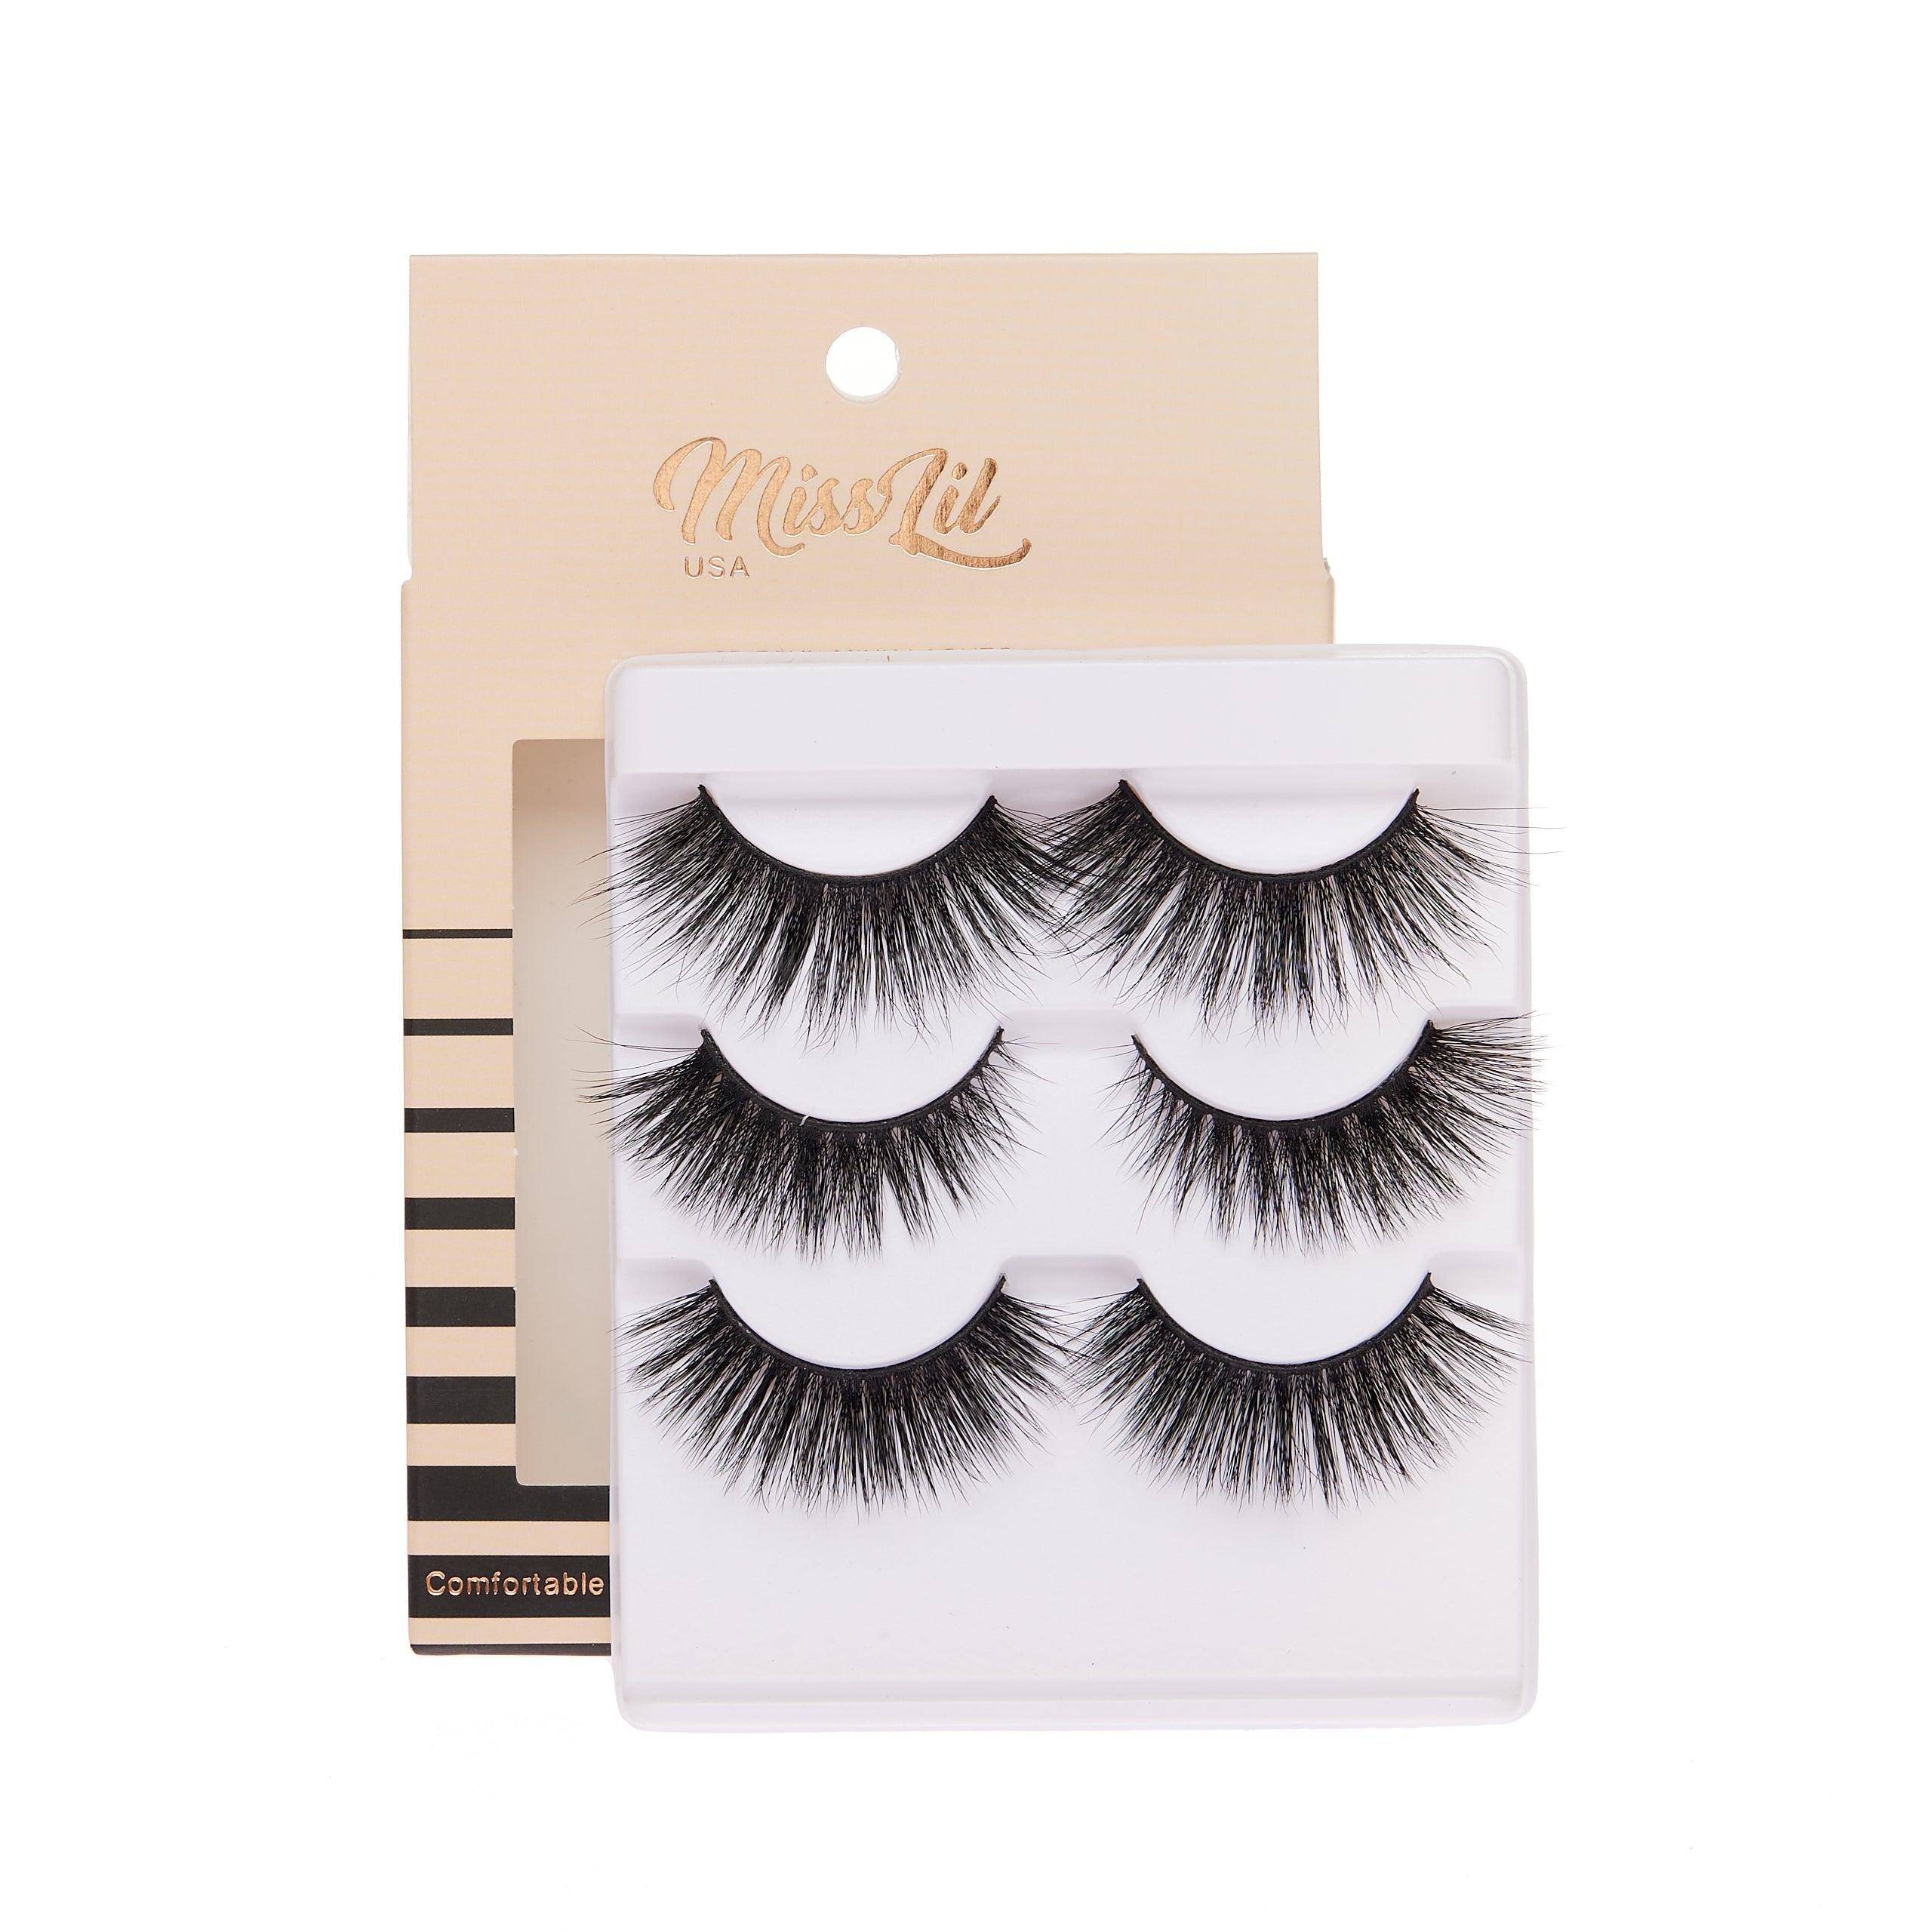 3-Pair Faux 9D Mink Eyelashes - Luxury Collection #17 - Pack of 12 - Miss Lil USA